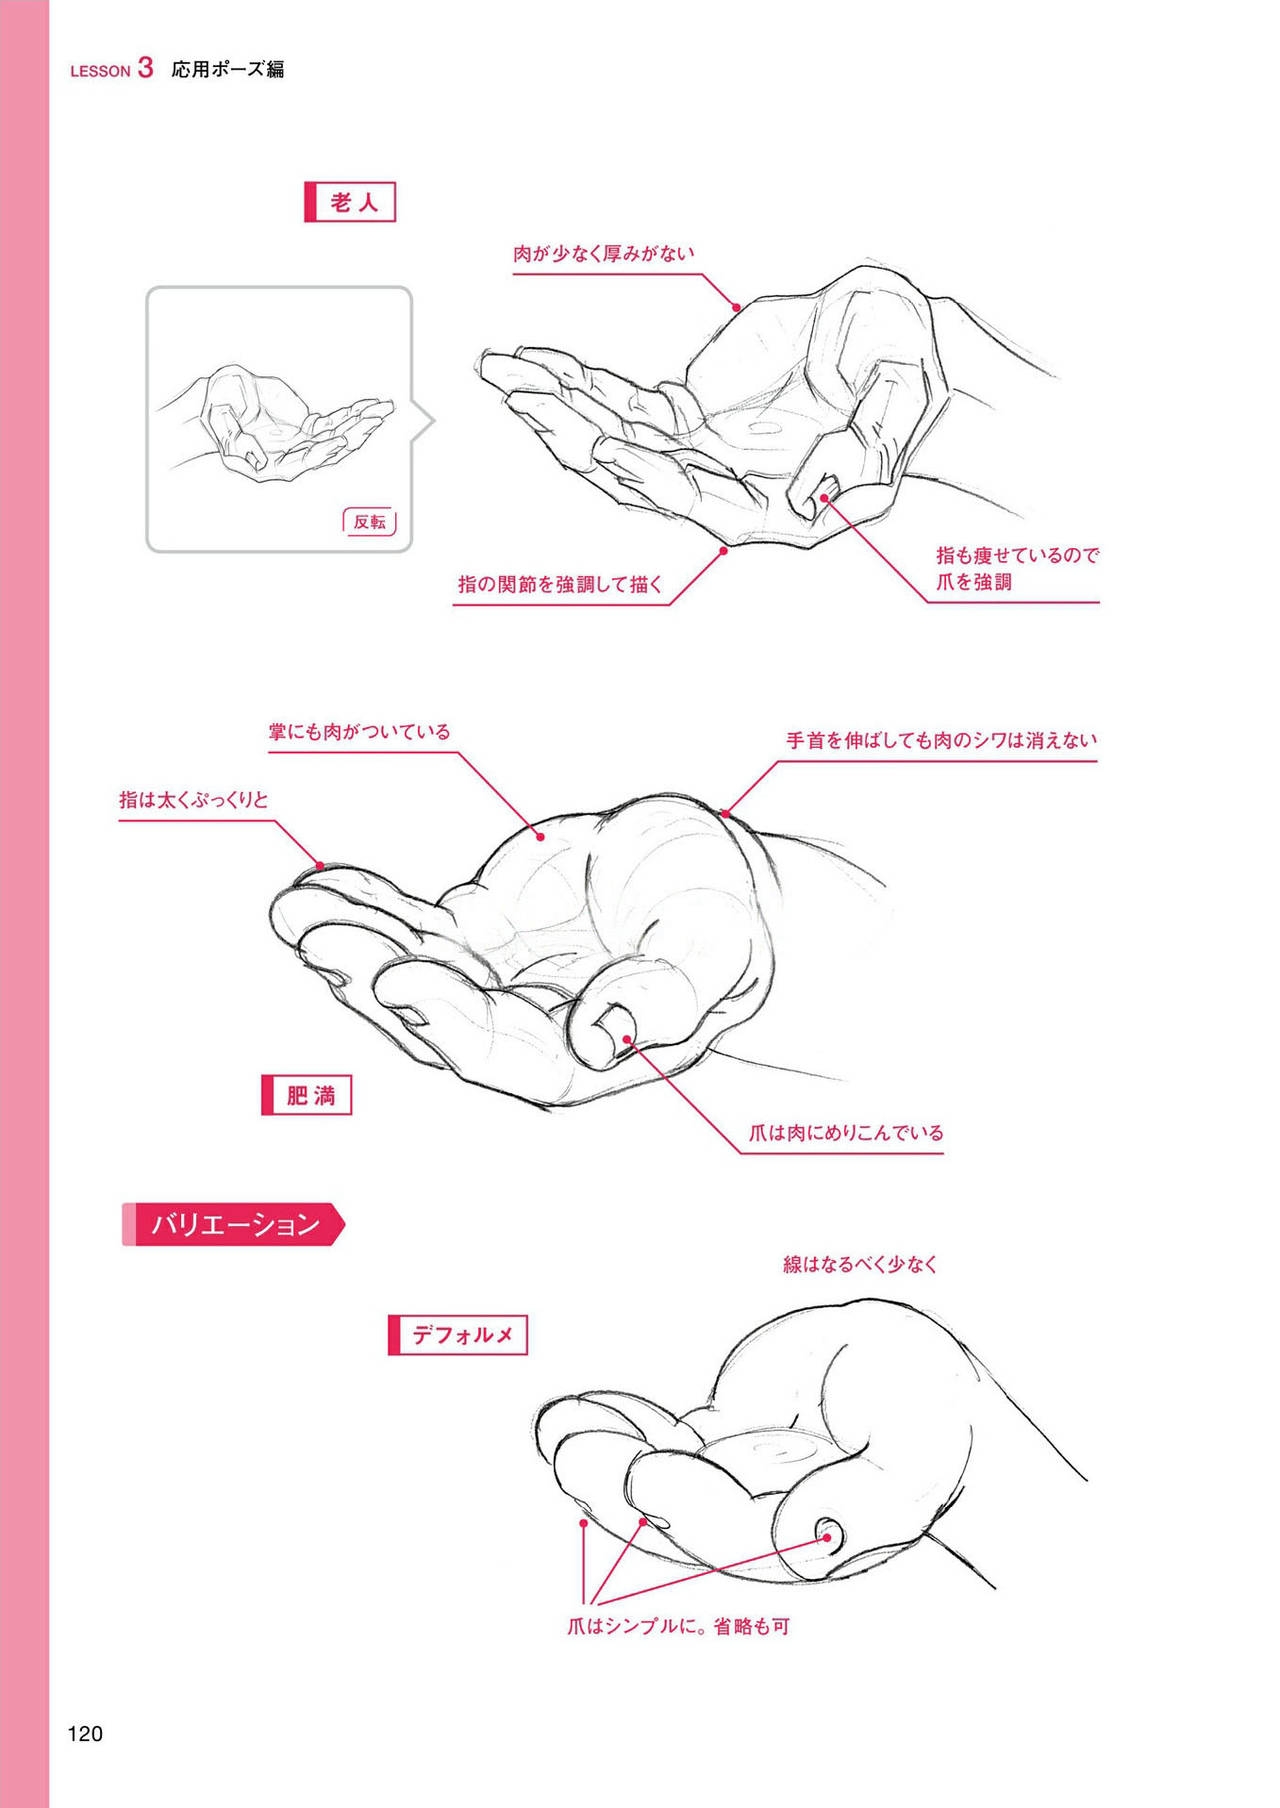 How to draw hands 120